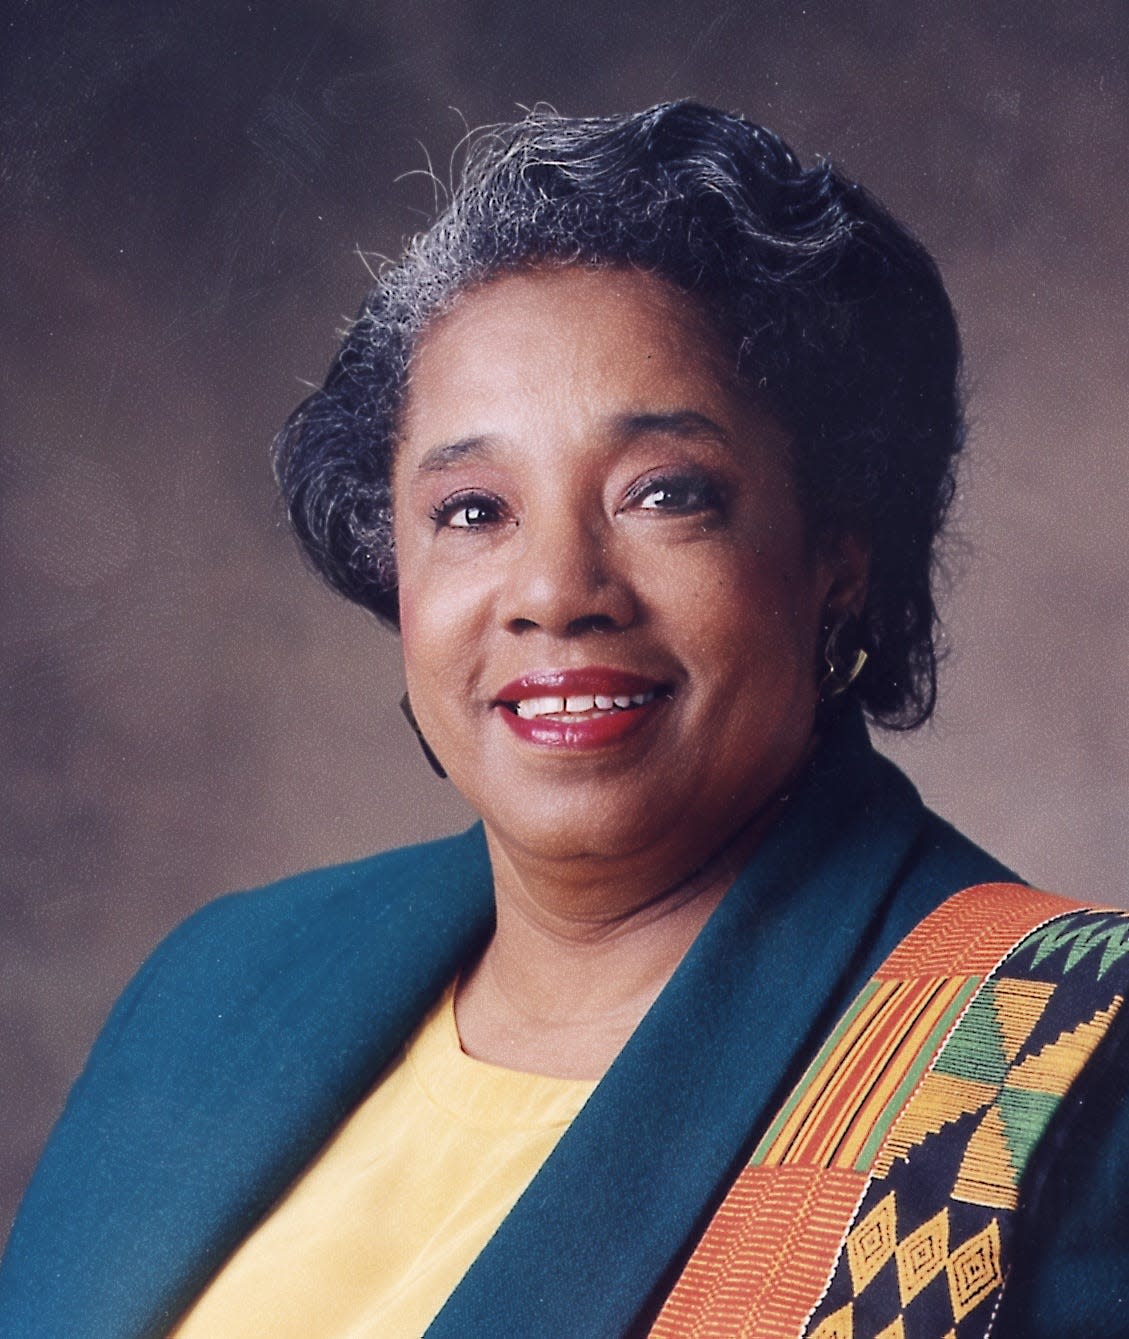 Anita Davis served as President of the Tallahassee branch of the NAACP, the Jake Gaither Neighborhood Association and as a Leon County Commissioner